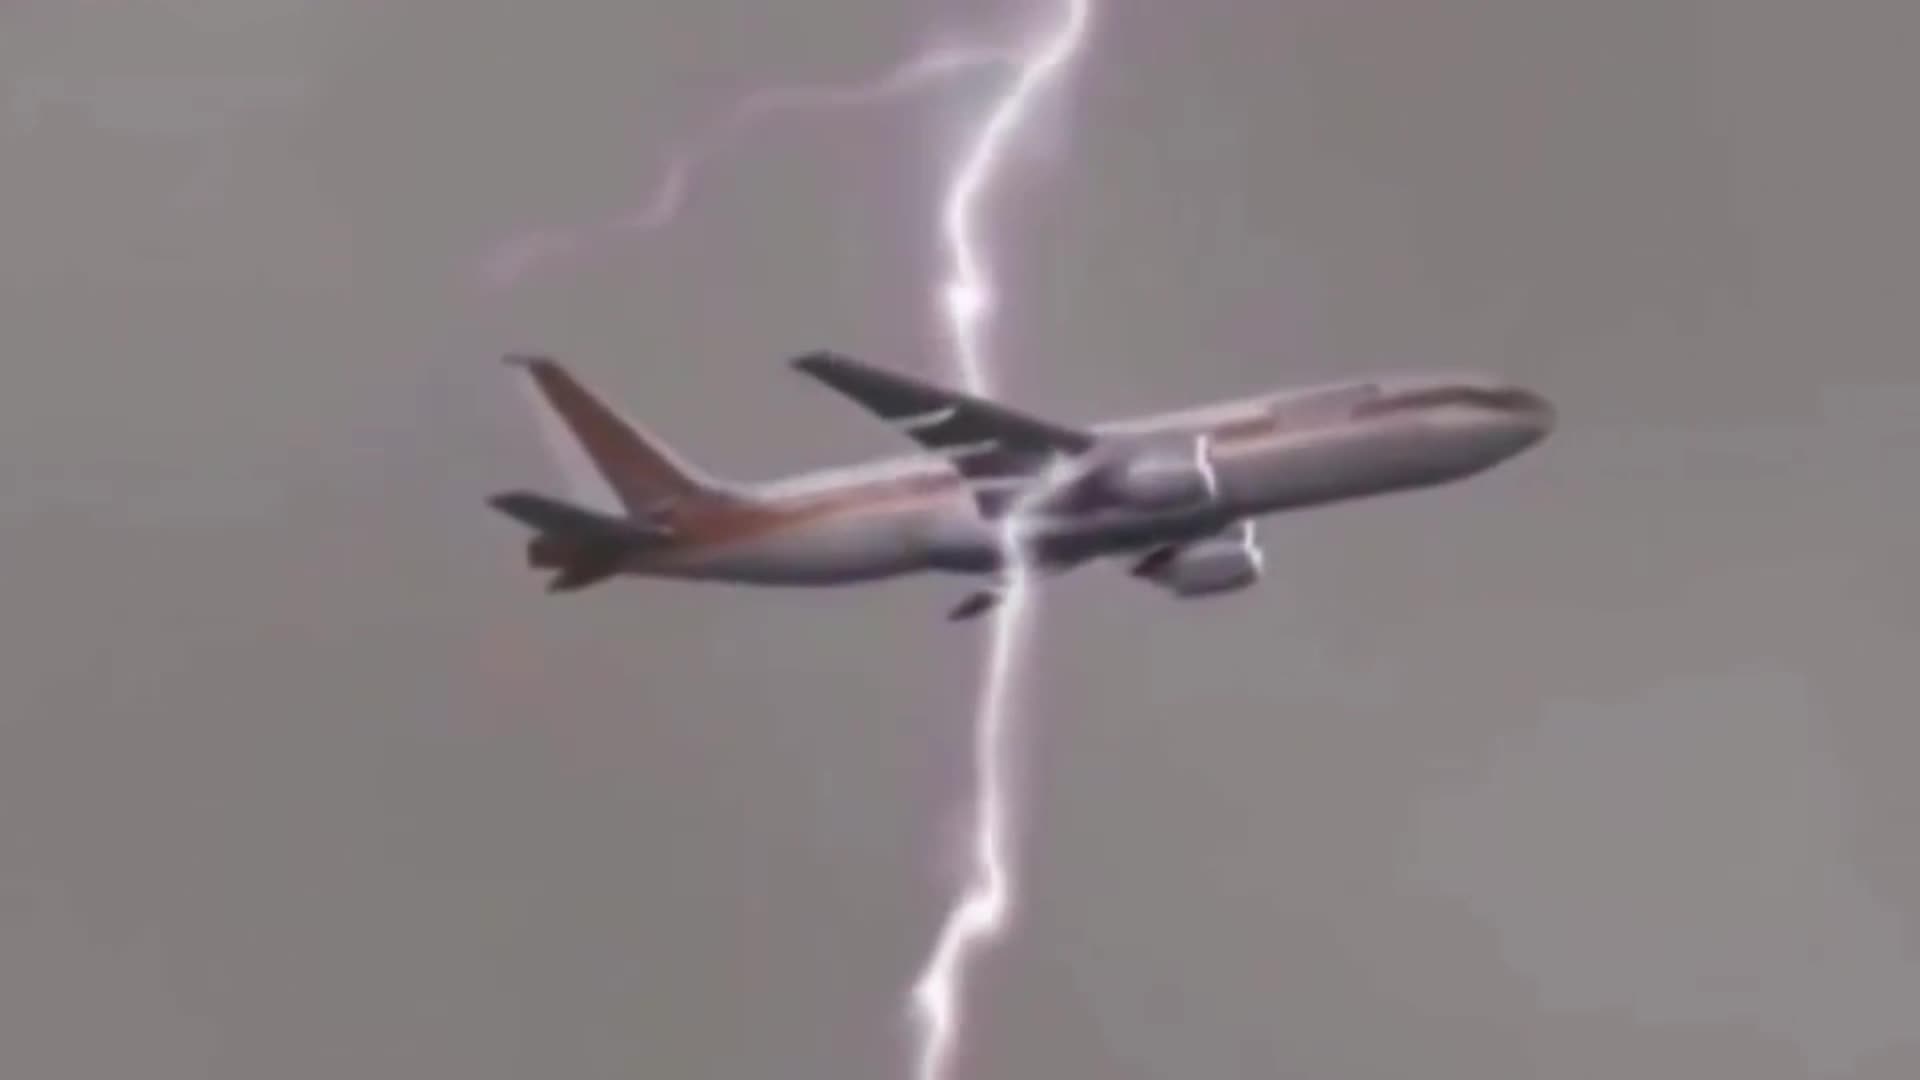 The camera recorded a frightening scene, and the airplane was struck by lightning in the air. It was very exciting to see.